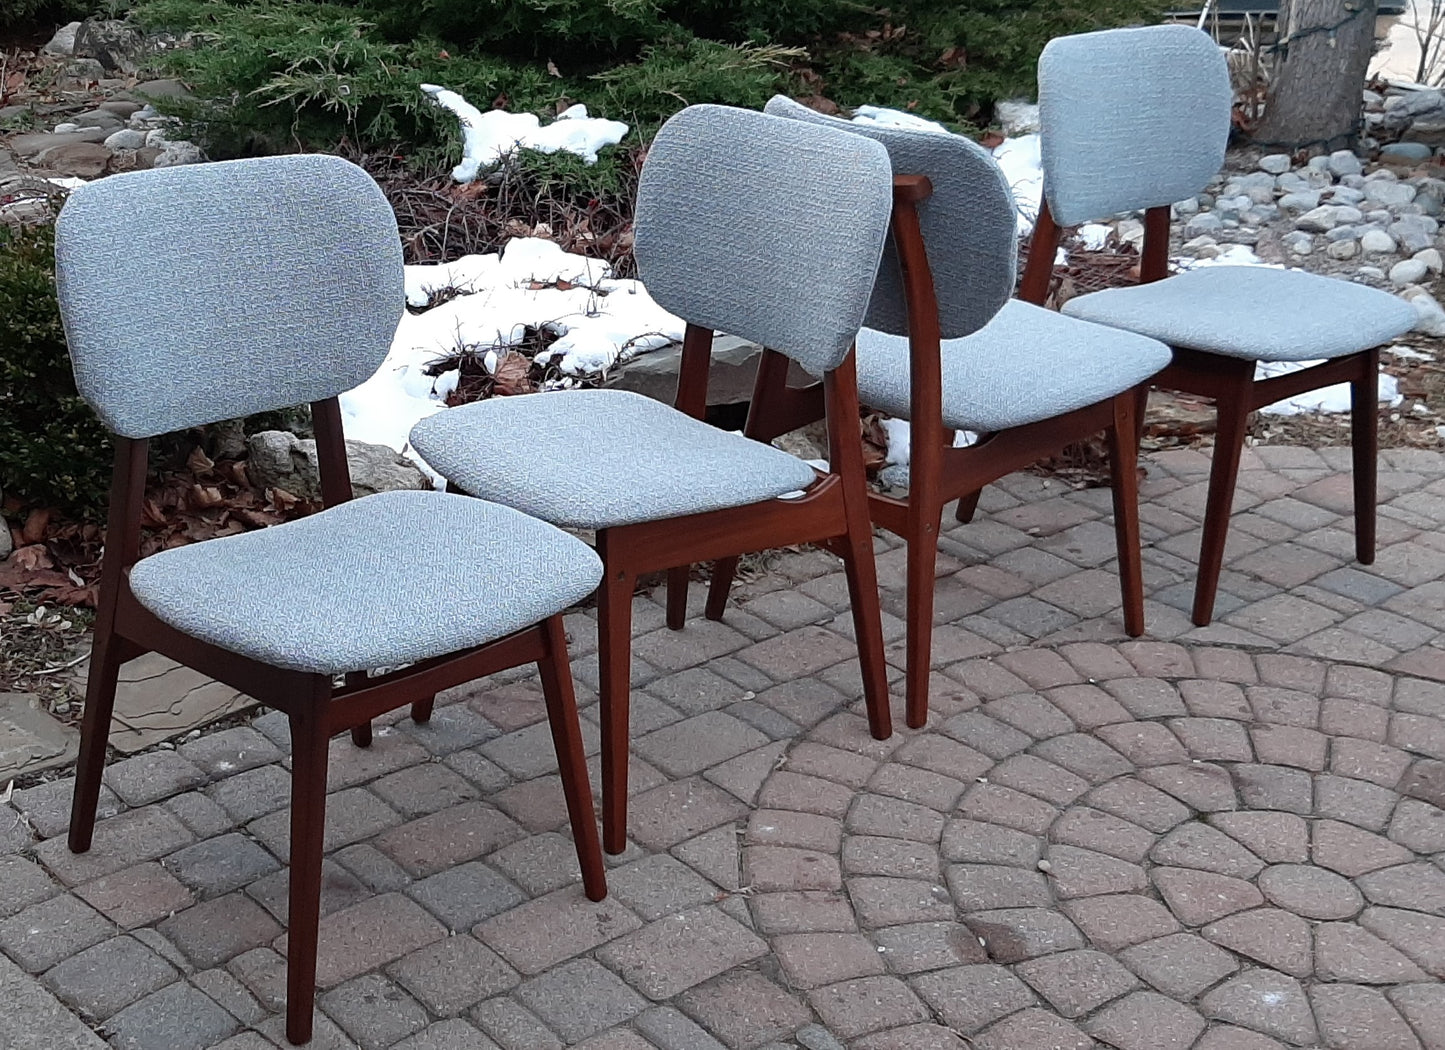 4 REFINISHED REUPHOLSTERED Danish MCM Teak Dining Chairs, A. Olsen style,  like new